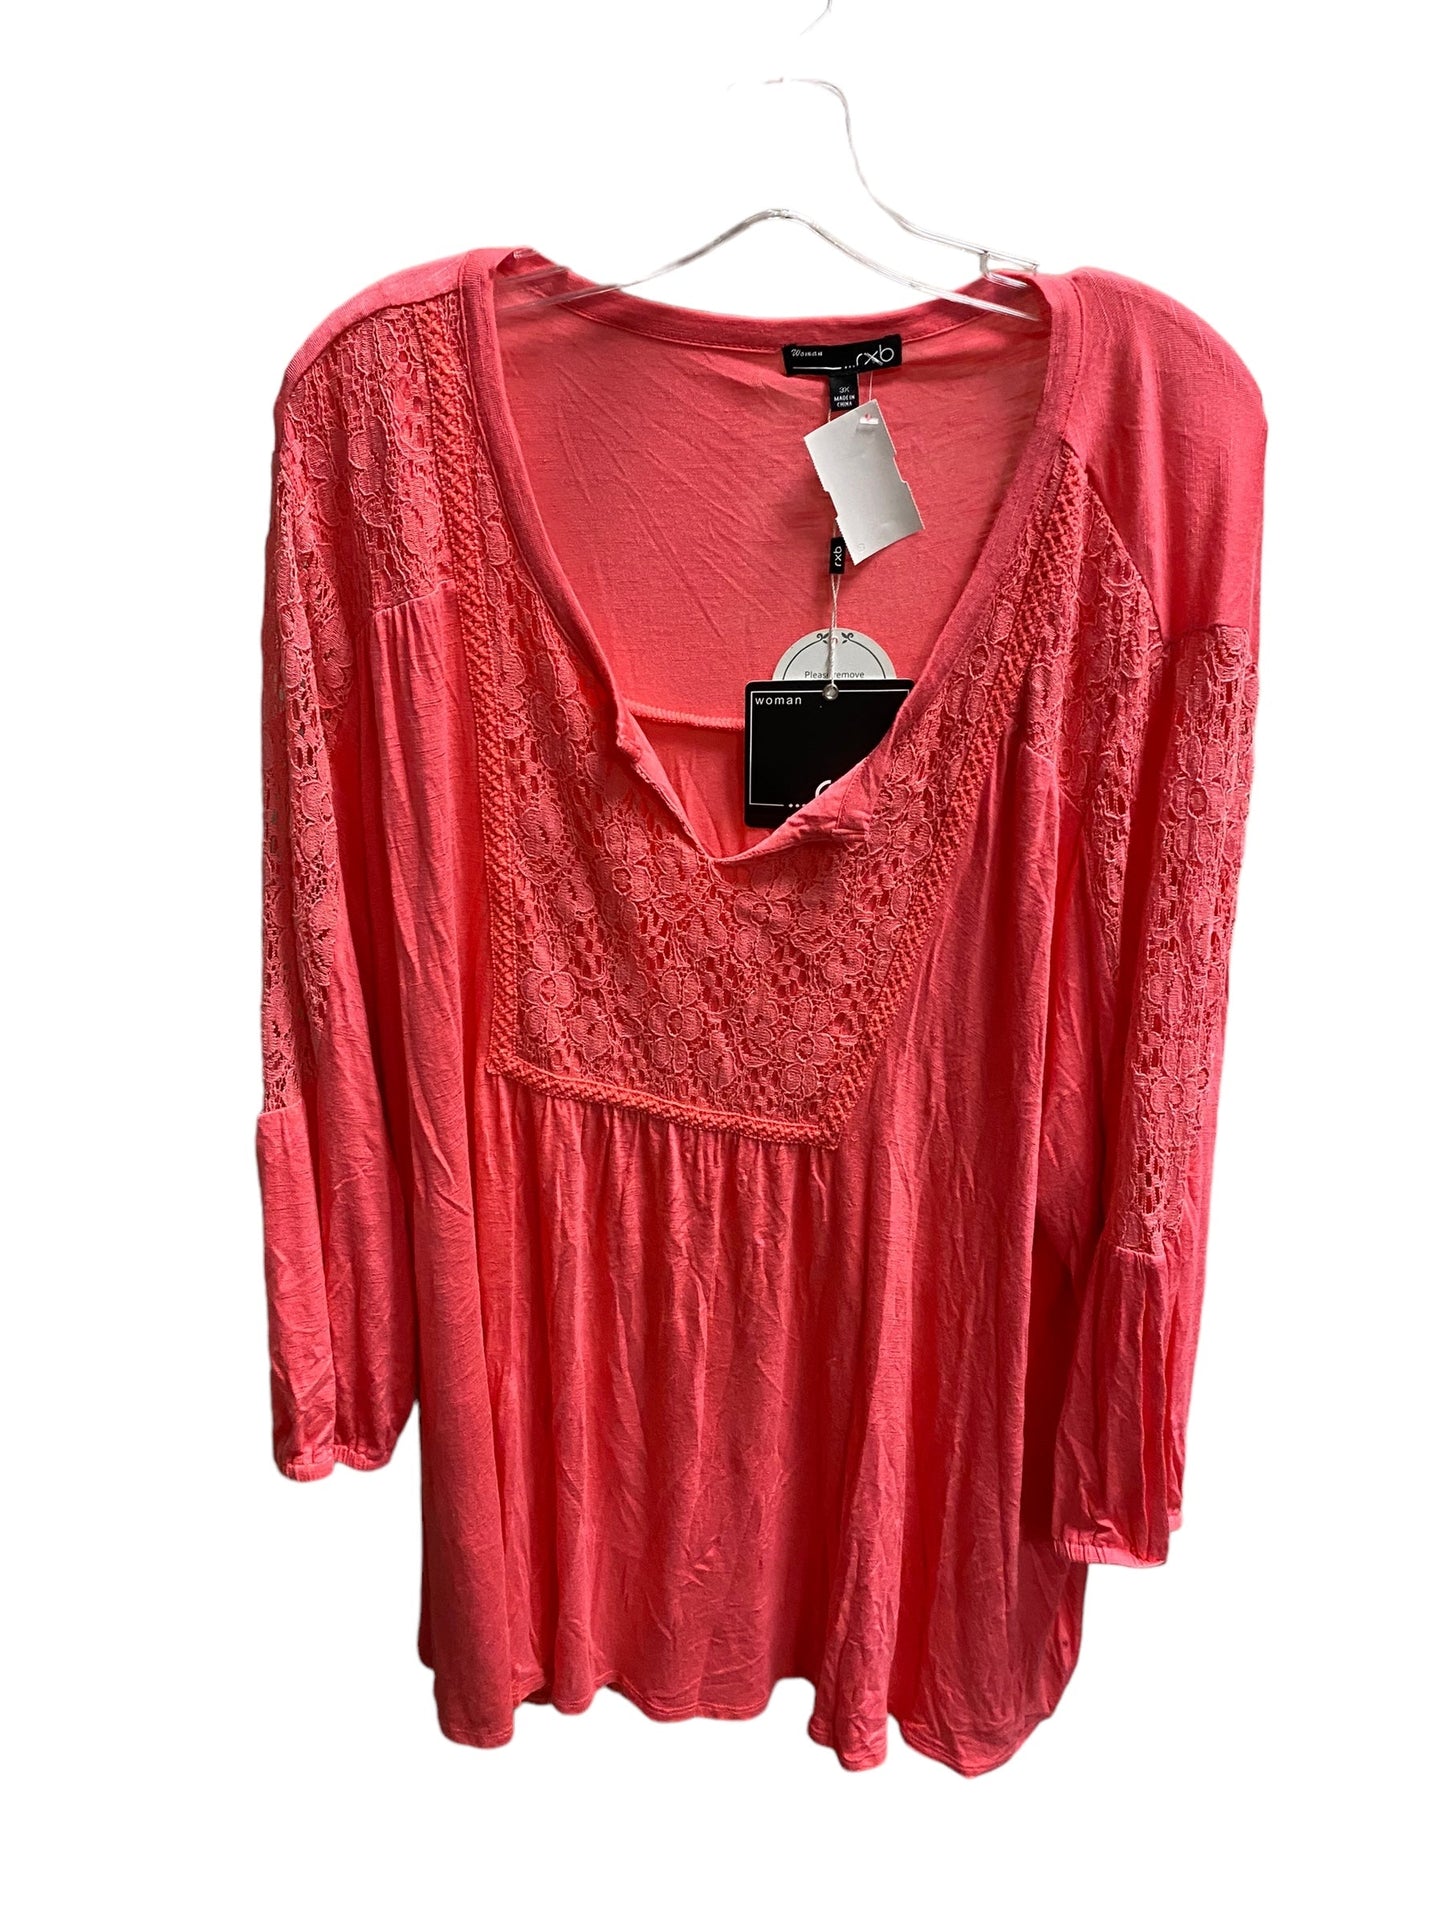 Coral Top Long Sleeve Rxb, Size 3x